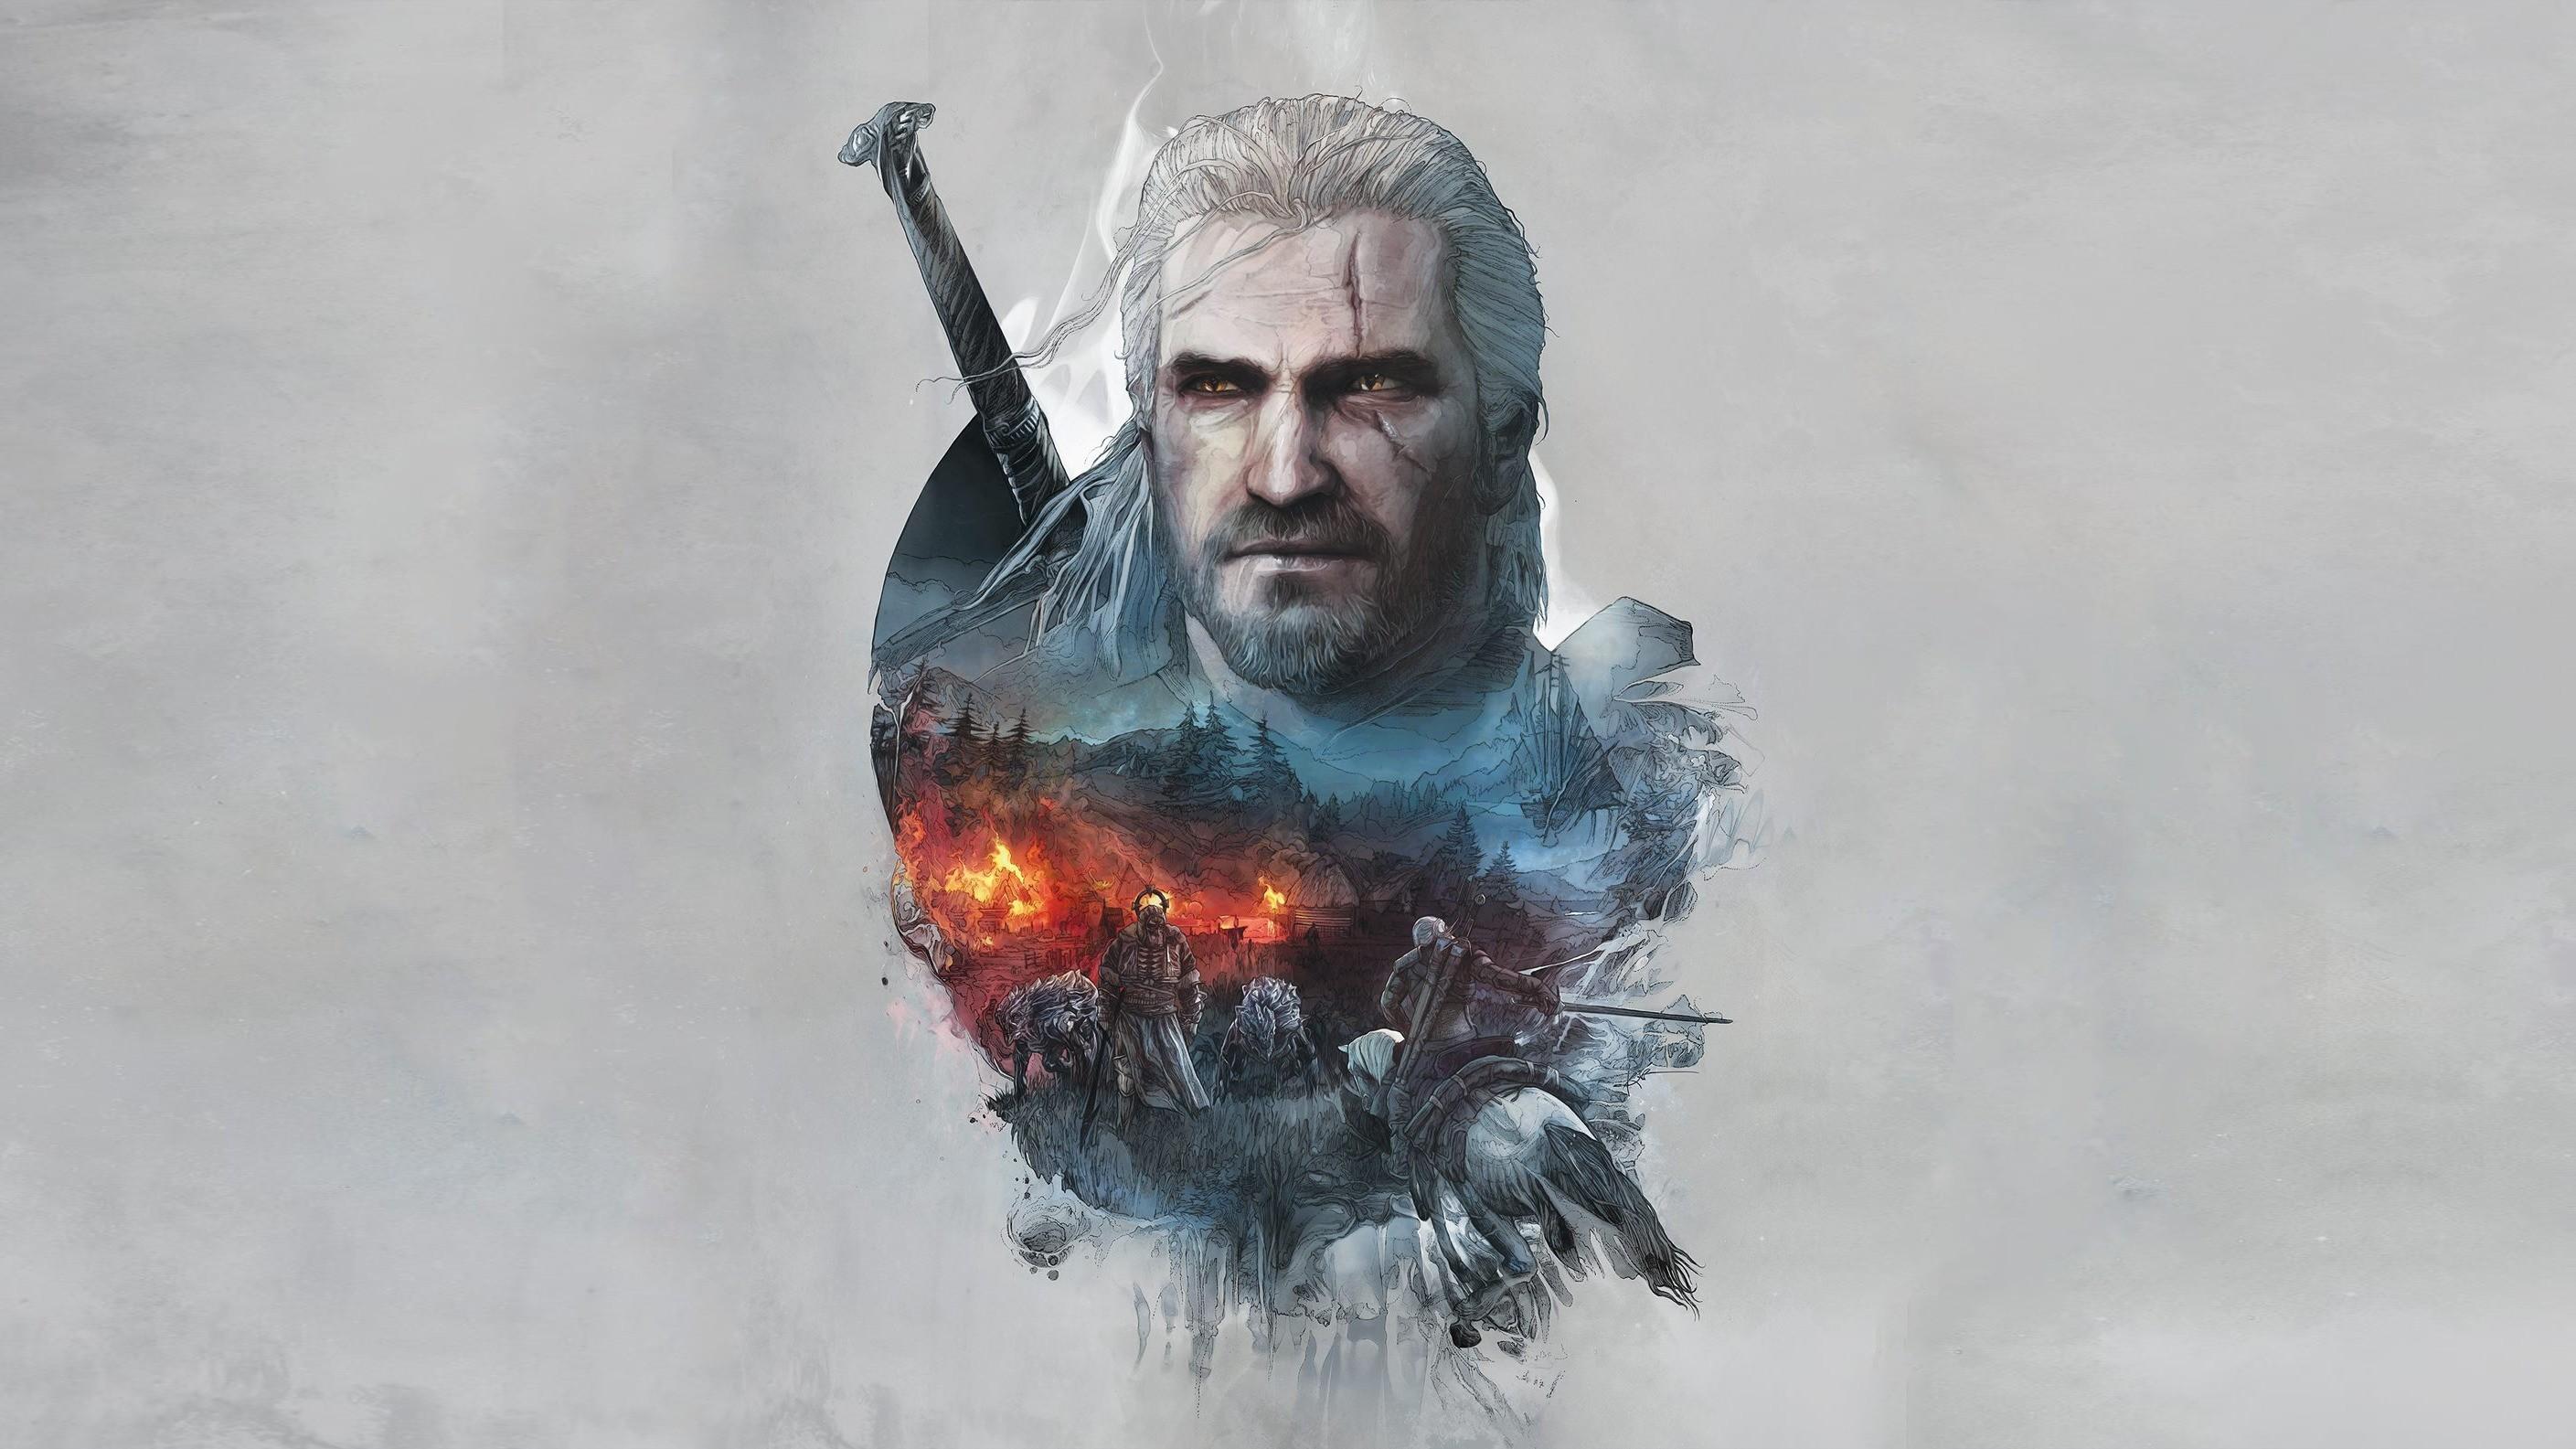 2818 x 1585 · jpeg - The Witcher 3 Geralt of Rivia Artwork, HD Games, 4k Wallpapers, Images ...